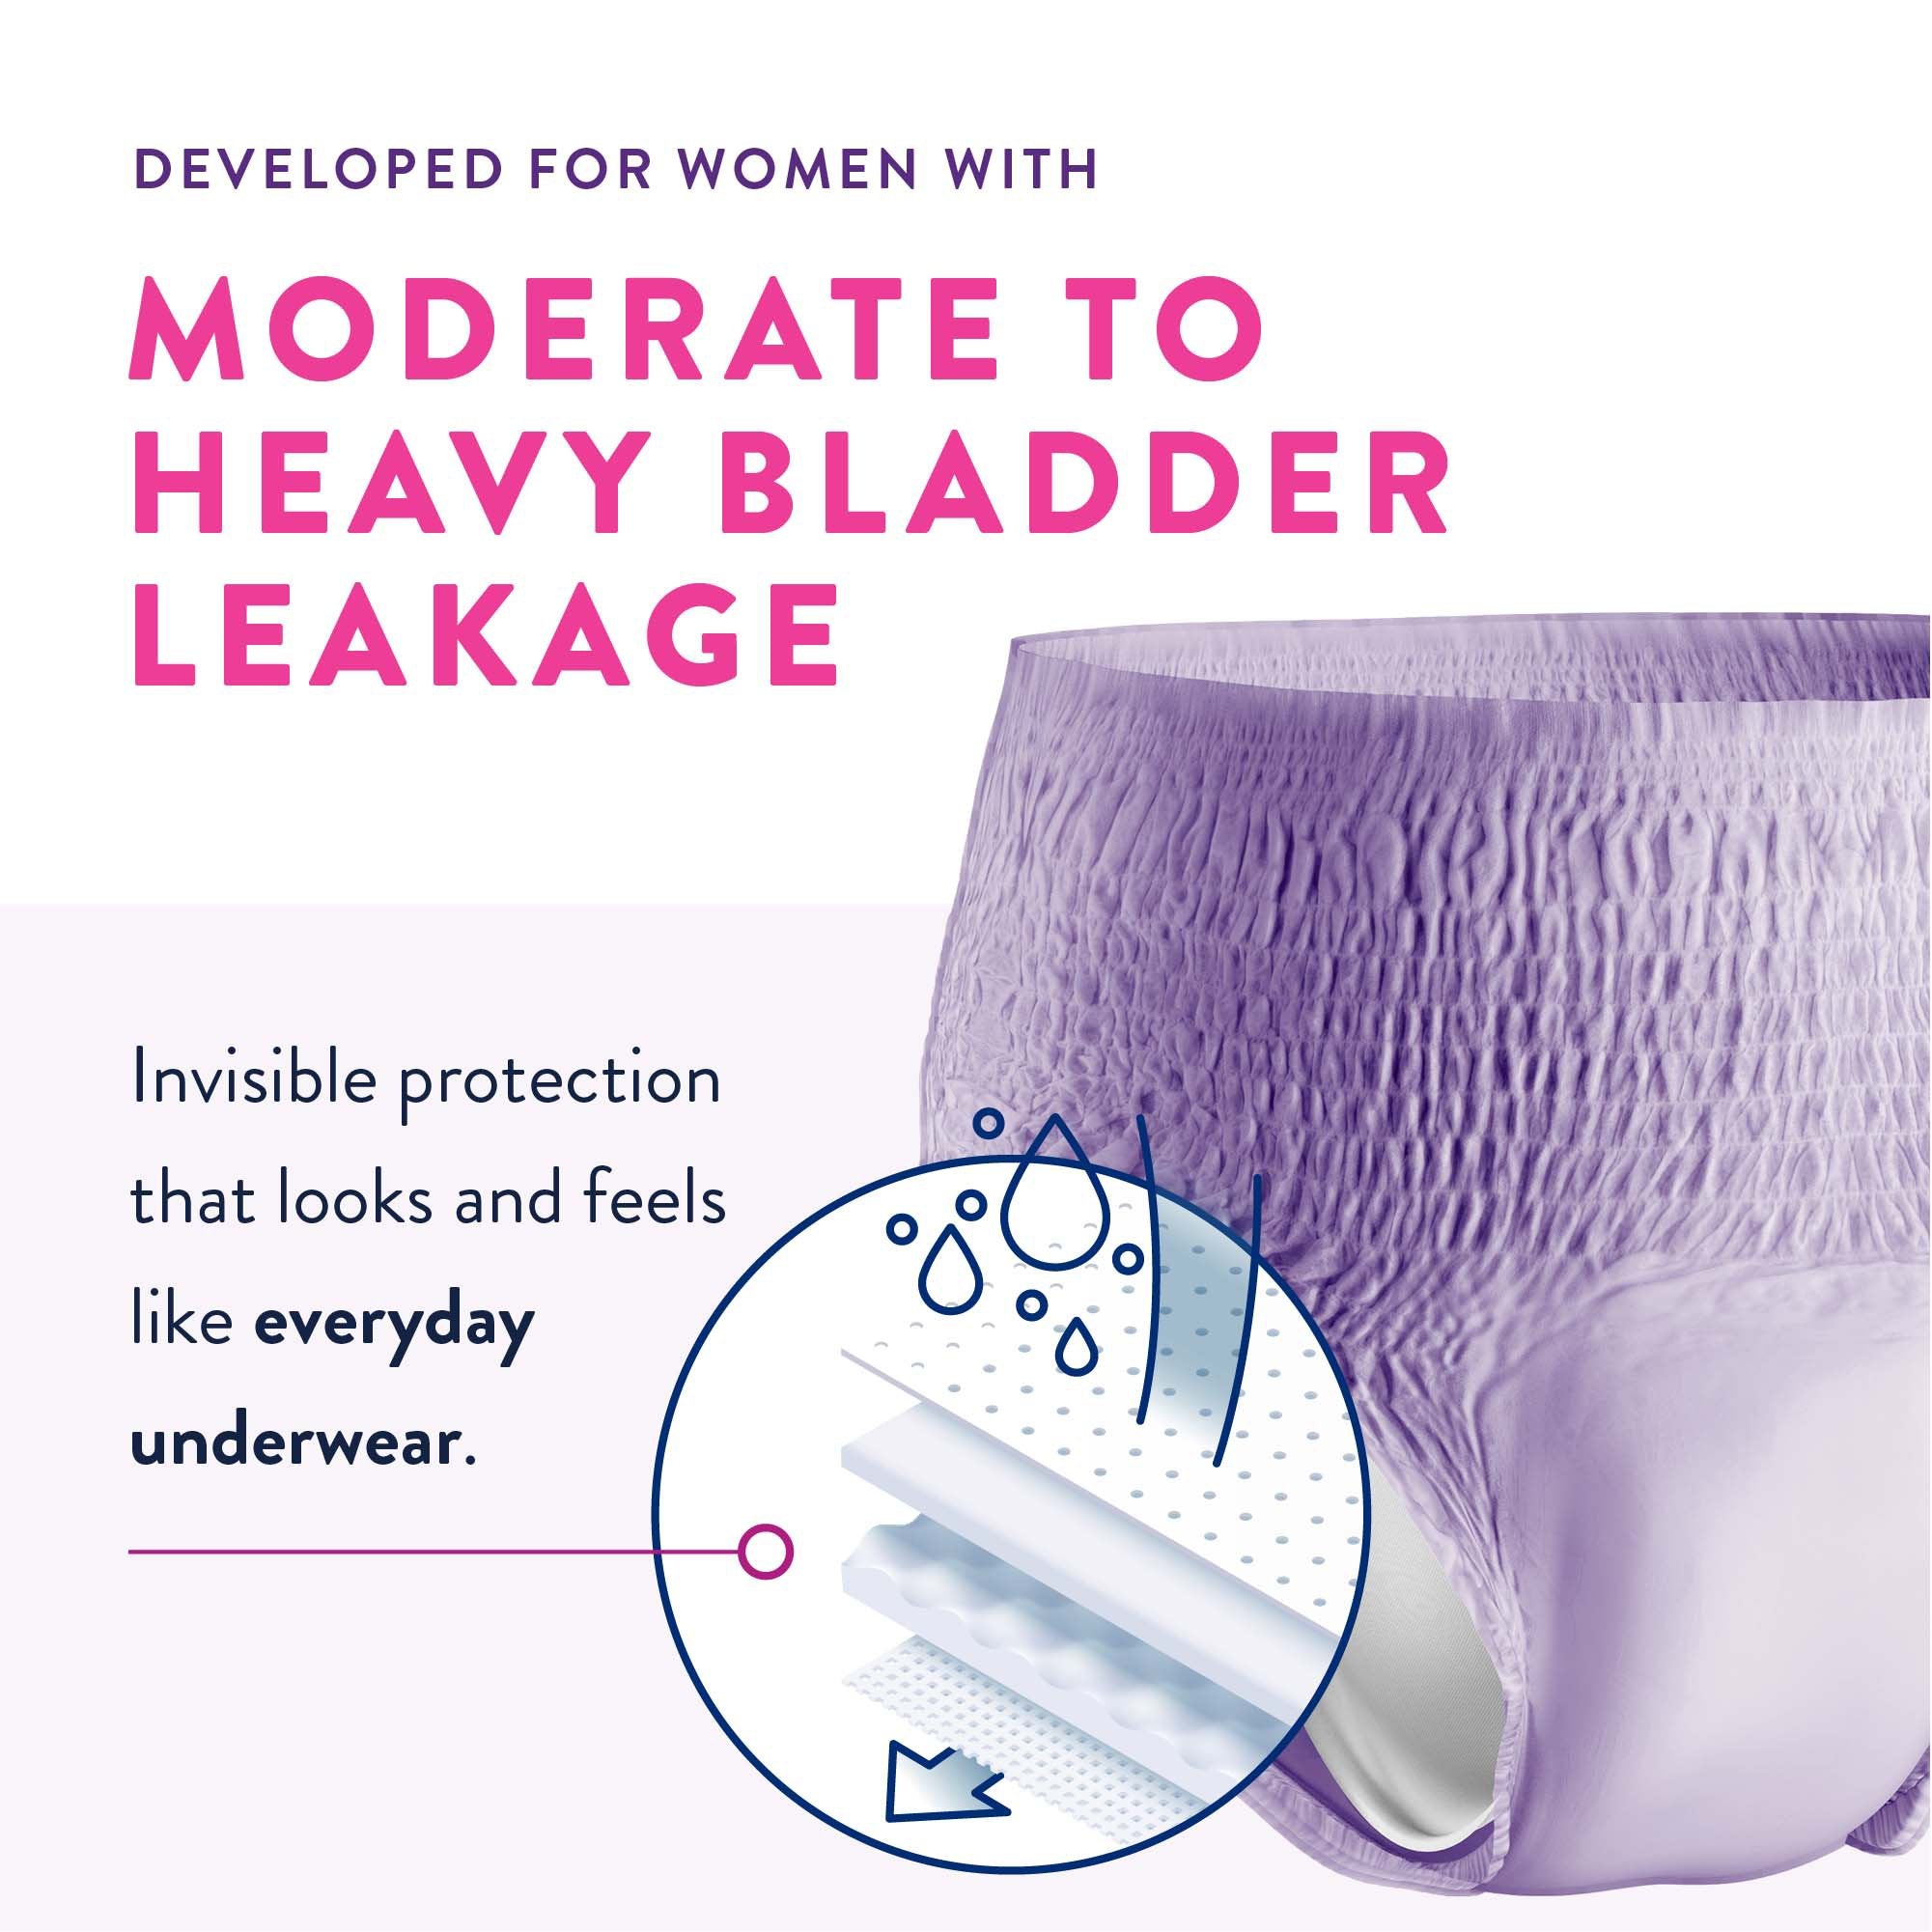 Female Adult Absorbent Underwear Prevail For Women Daily Underwear Pull On with Tear Away Seams X-Large Disposable Heavy Absorbency